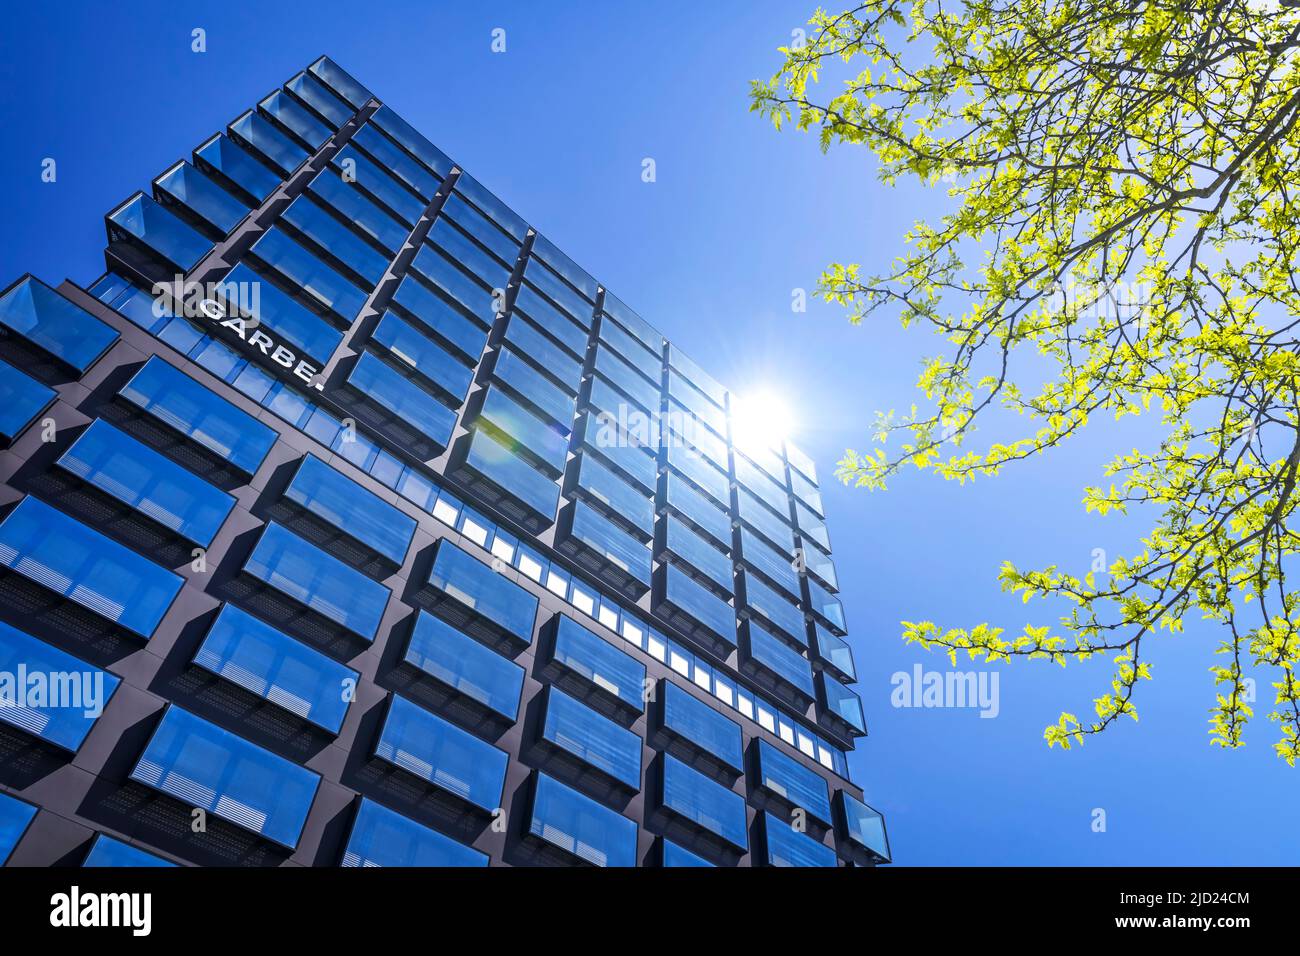 Campus Tower Building In The Hafencity Of Hamburg, Germany Stock Photo